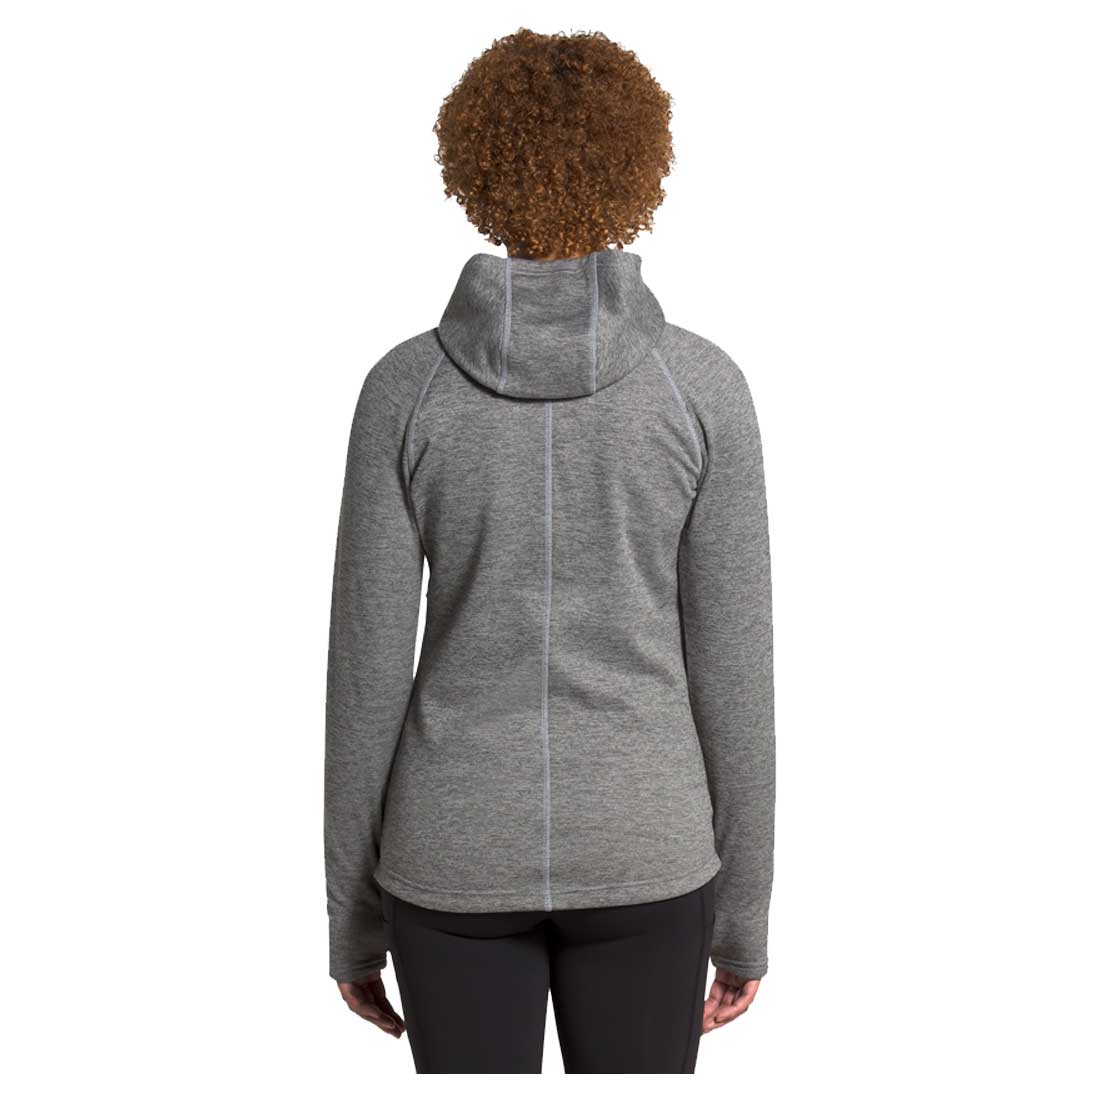 The North Face Canyonlands Hoodie - Women's